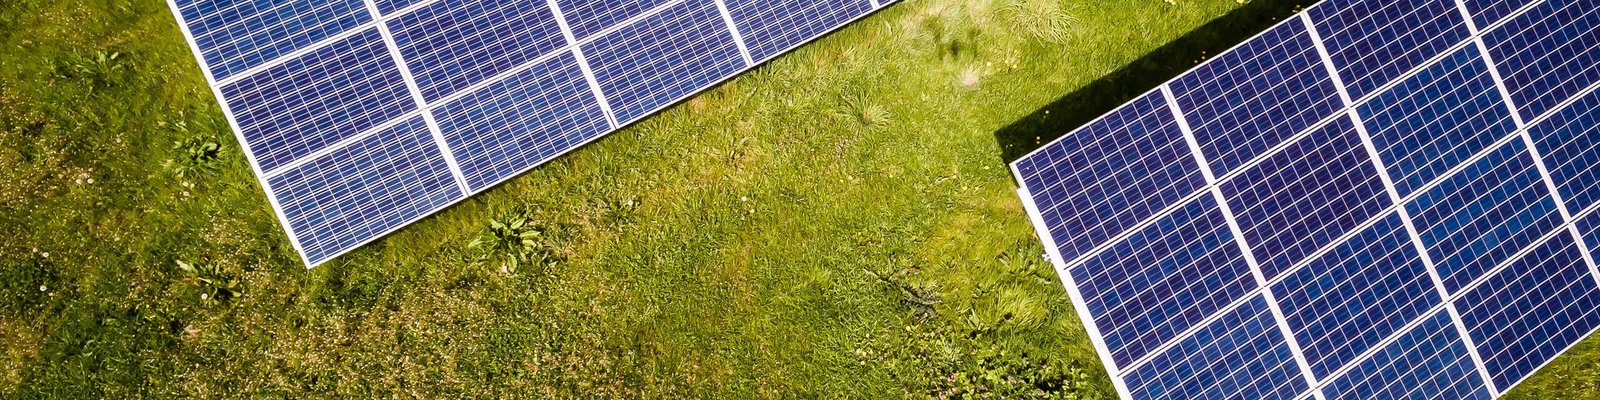 Overhead view of solar arrays on a grassy field